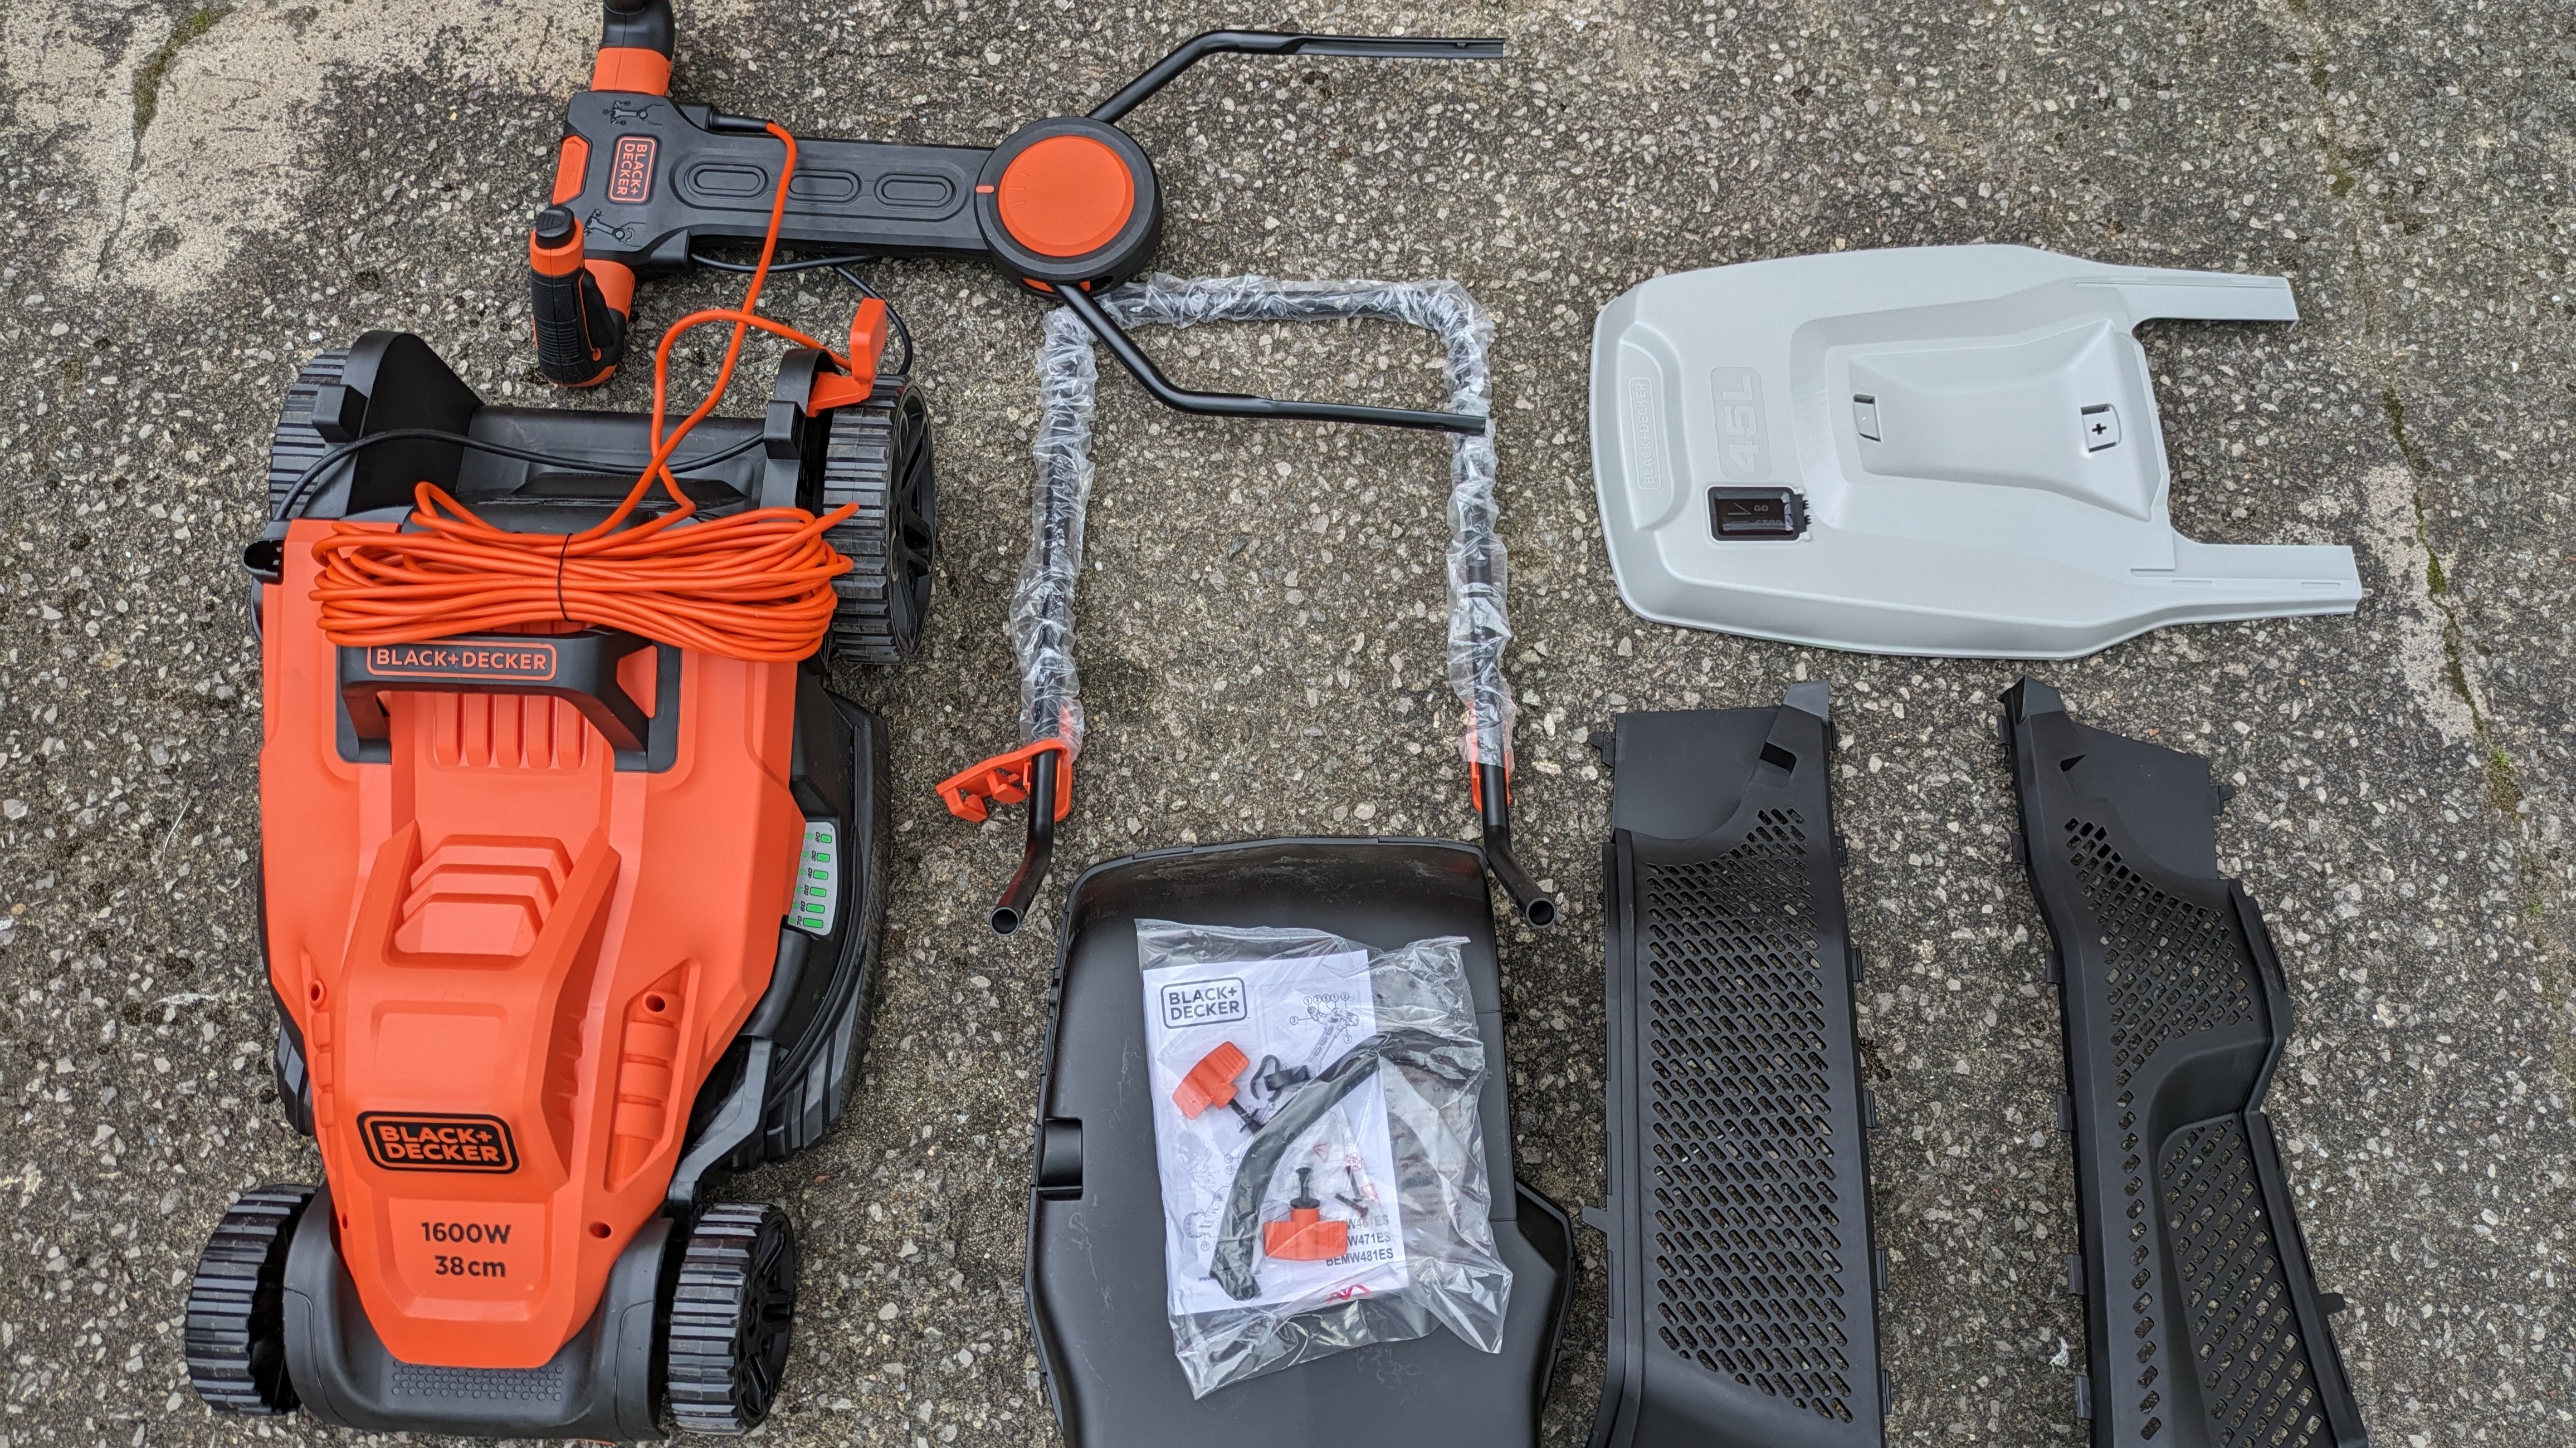 The flat-packed components of the Black and Decker lawnmower, spread out on the ground after unboxing.